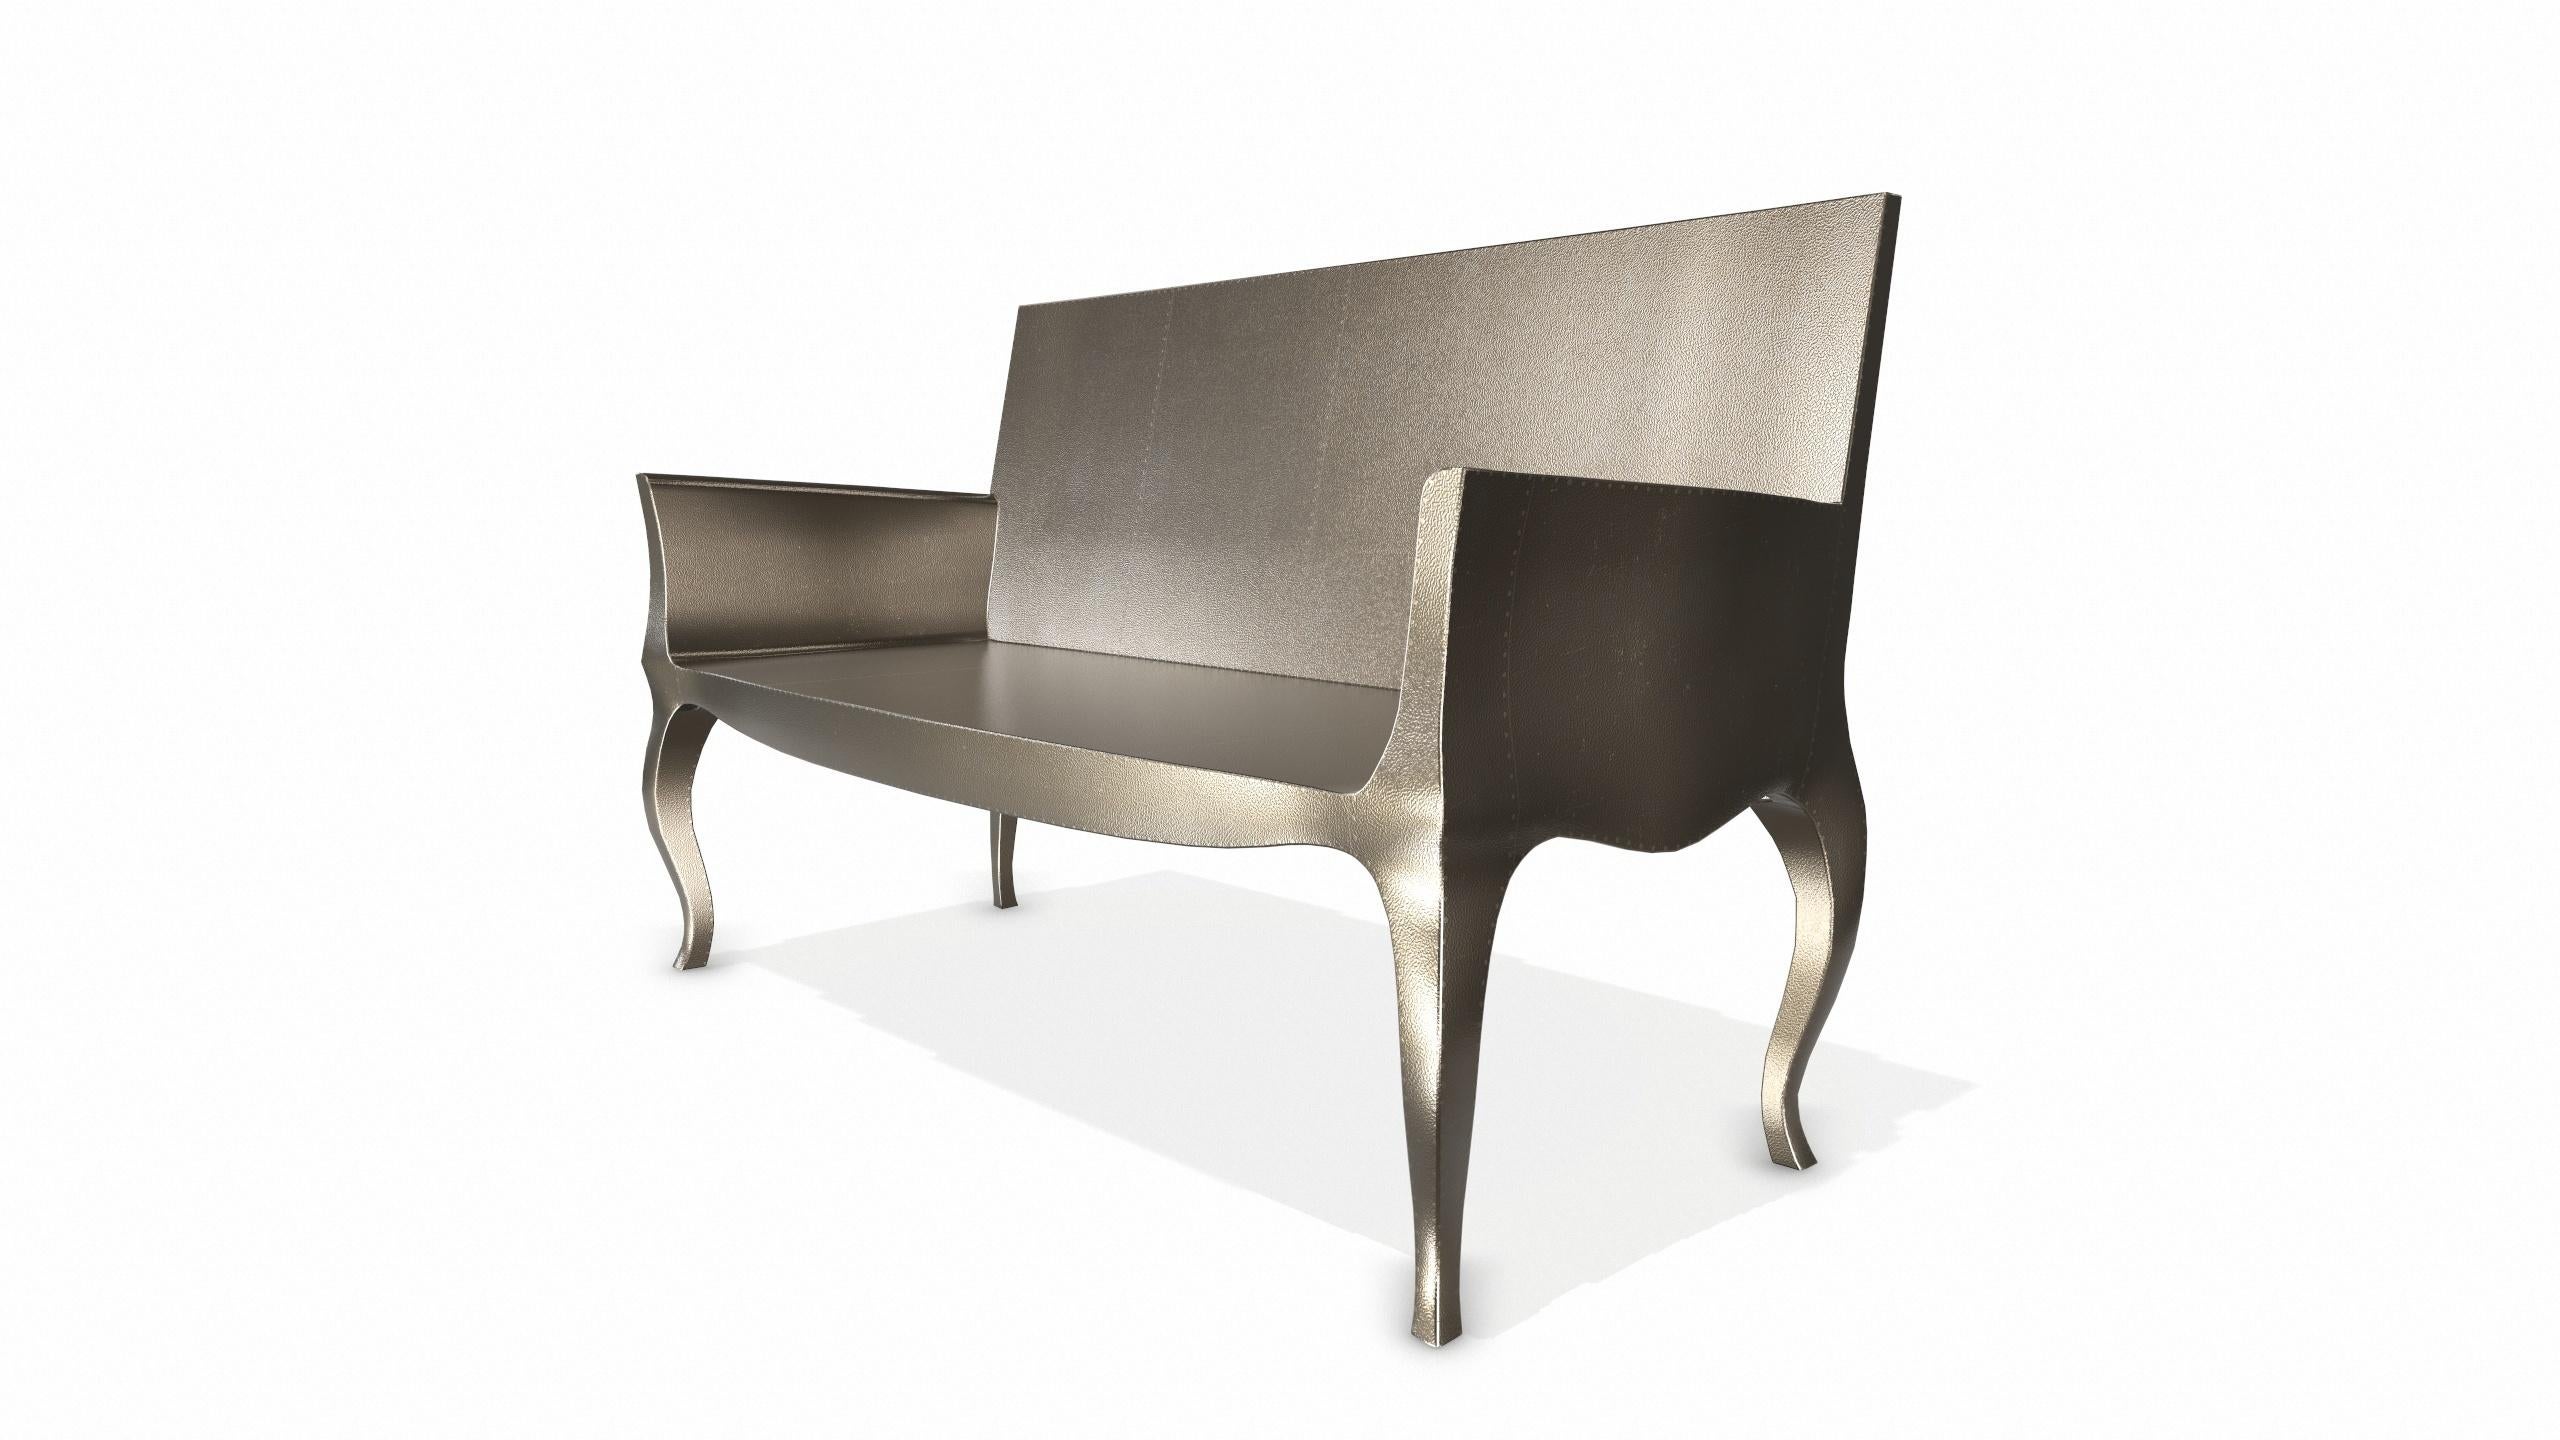 Hand-Crafted Louise Settee Art Deco Canapes in Fine Hammered Antique Bronze by Paul Mathieu For Sale